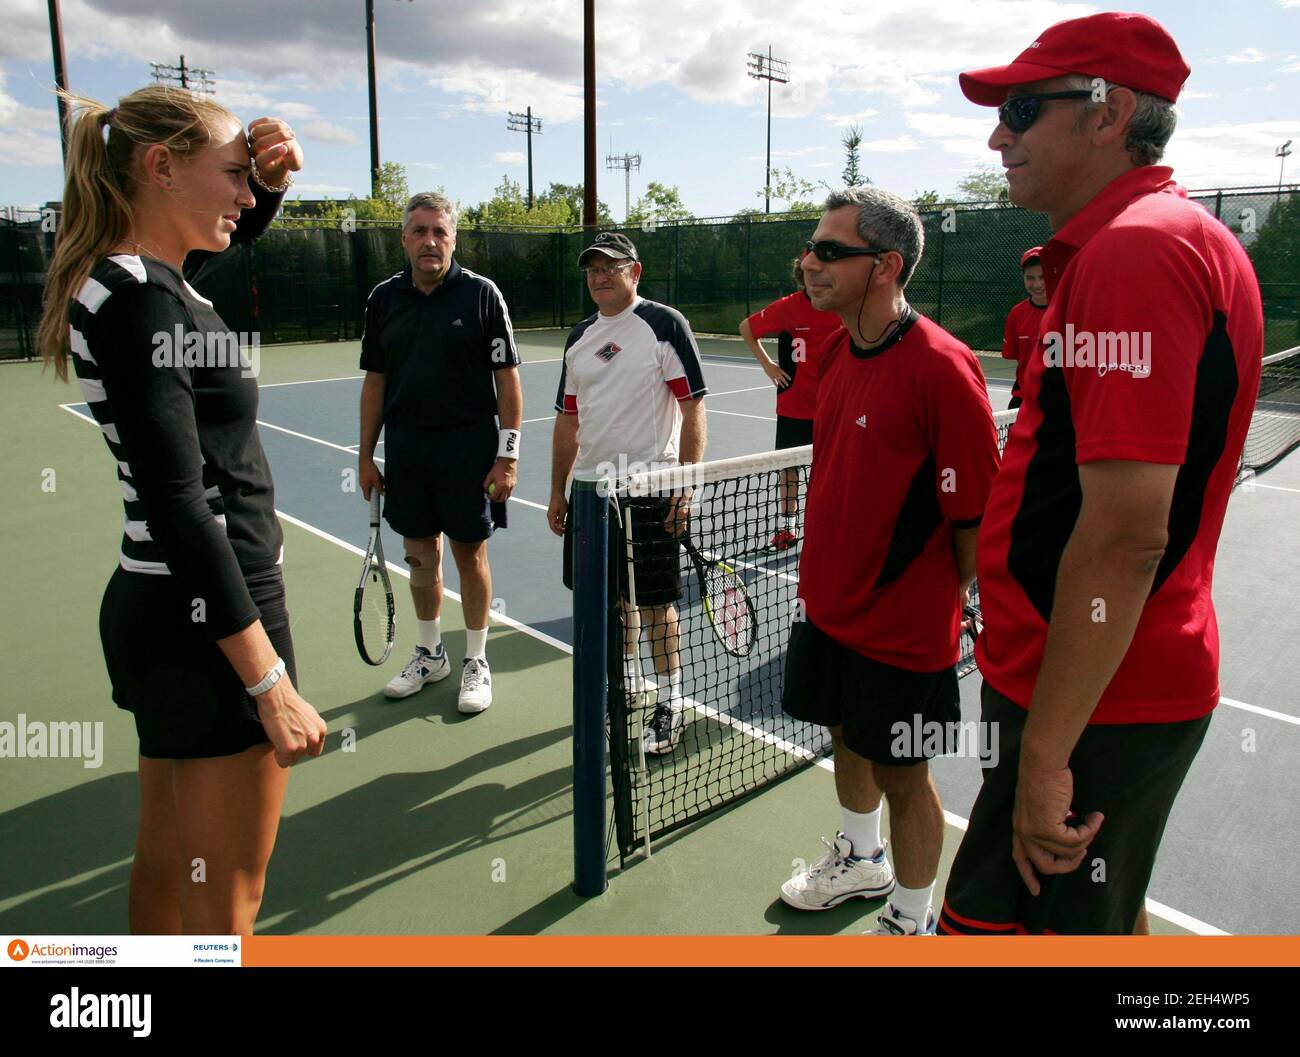 Tennis - Rogers Cup, Sony Ericsson WTA Tour - Montreal, Canada - 16/8/06  Tennis player Nicole Vaidisova of the Czech Republic (L) talks during the Rogers Pro-Am at the Rogers Cup, Sony Ericsson WTA Tour in Montreal, Canada August 16, 2006  Mandatory Credit: Action Images / Chris Wattie  Livepic Stock Photo